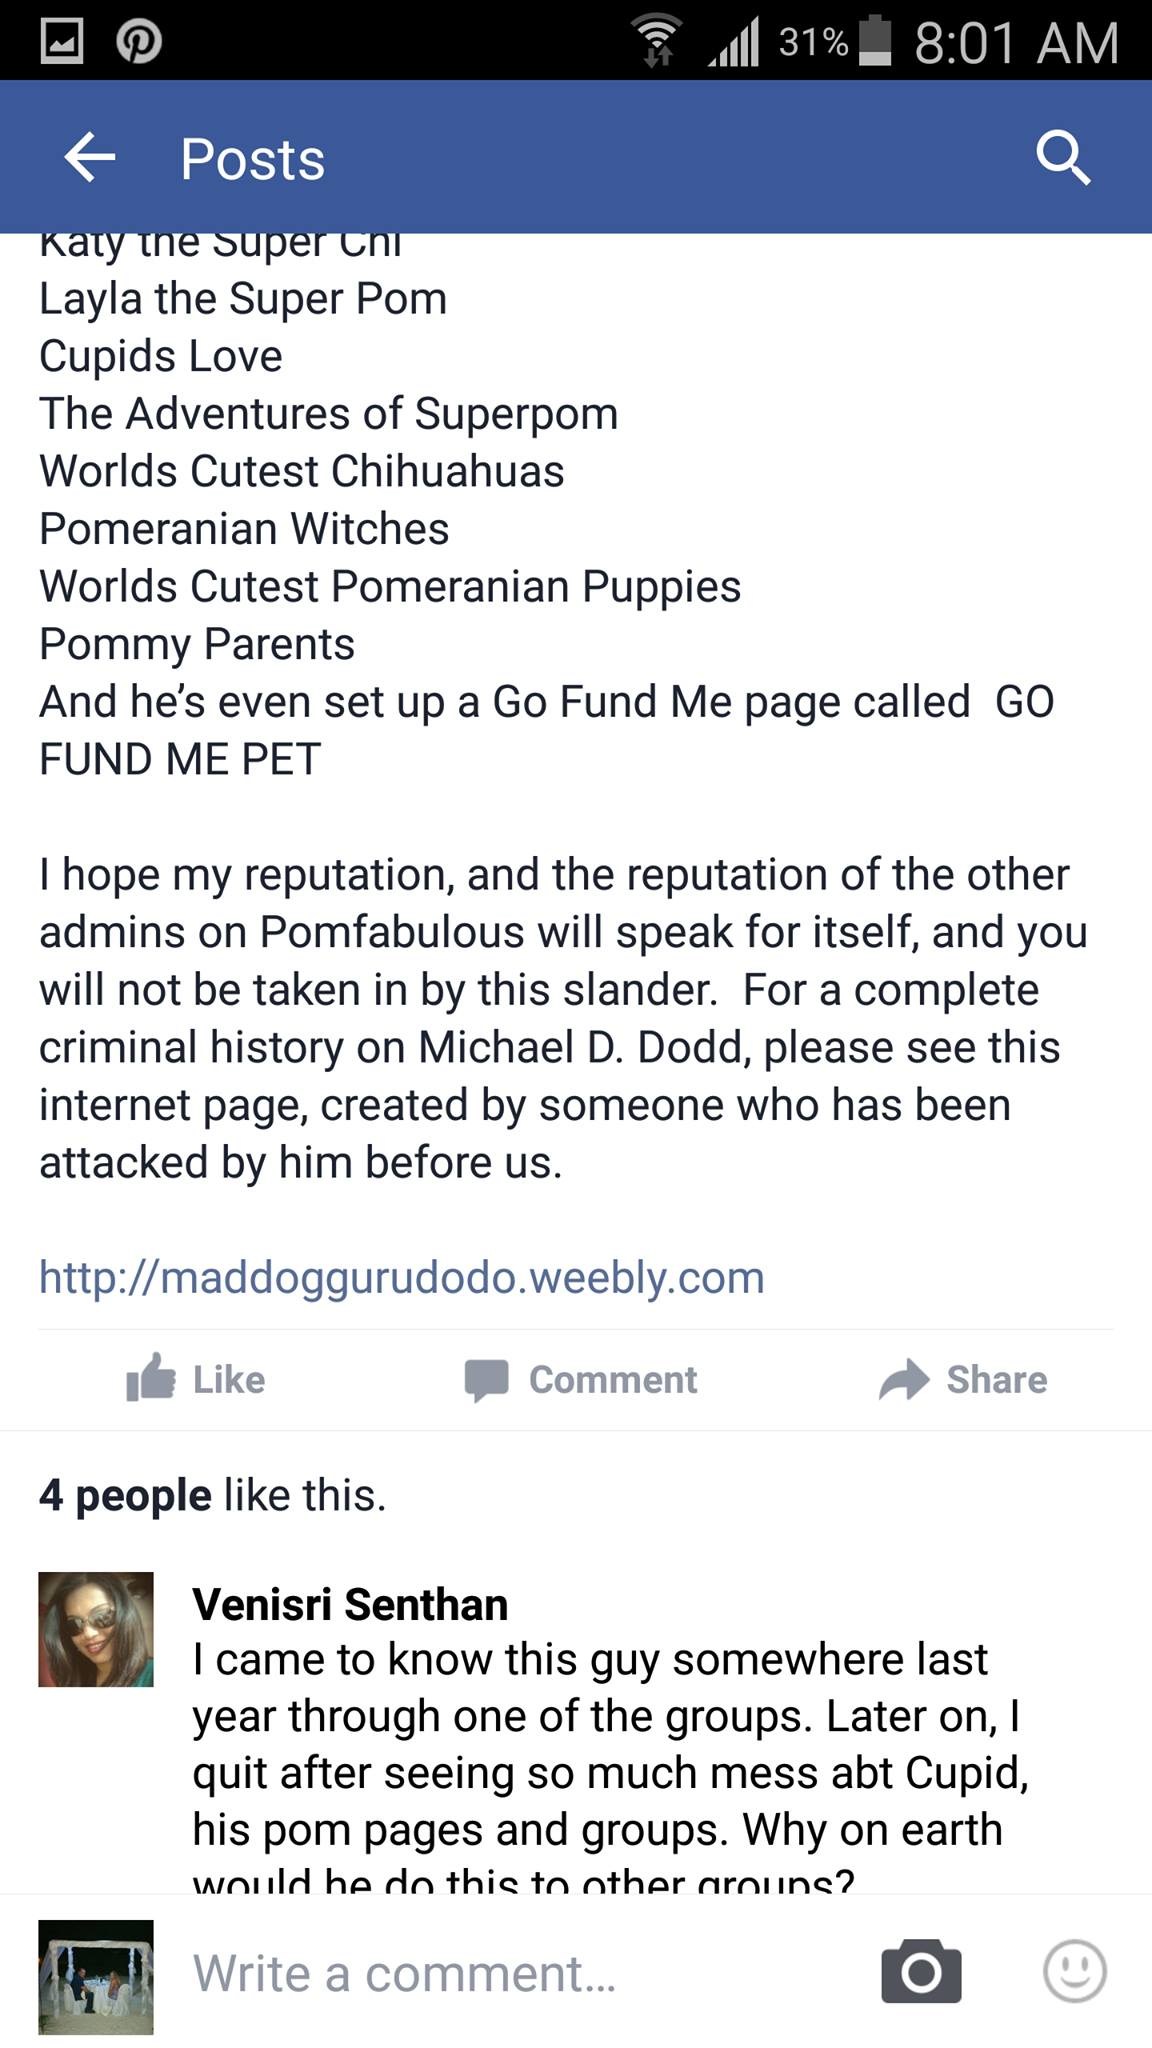 Randy Boles harassment and false allegations and sharing a web page that promoted beating and drowning dogs